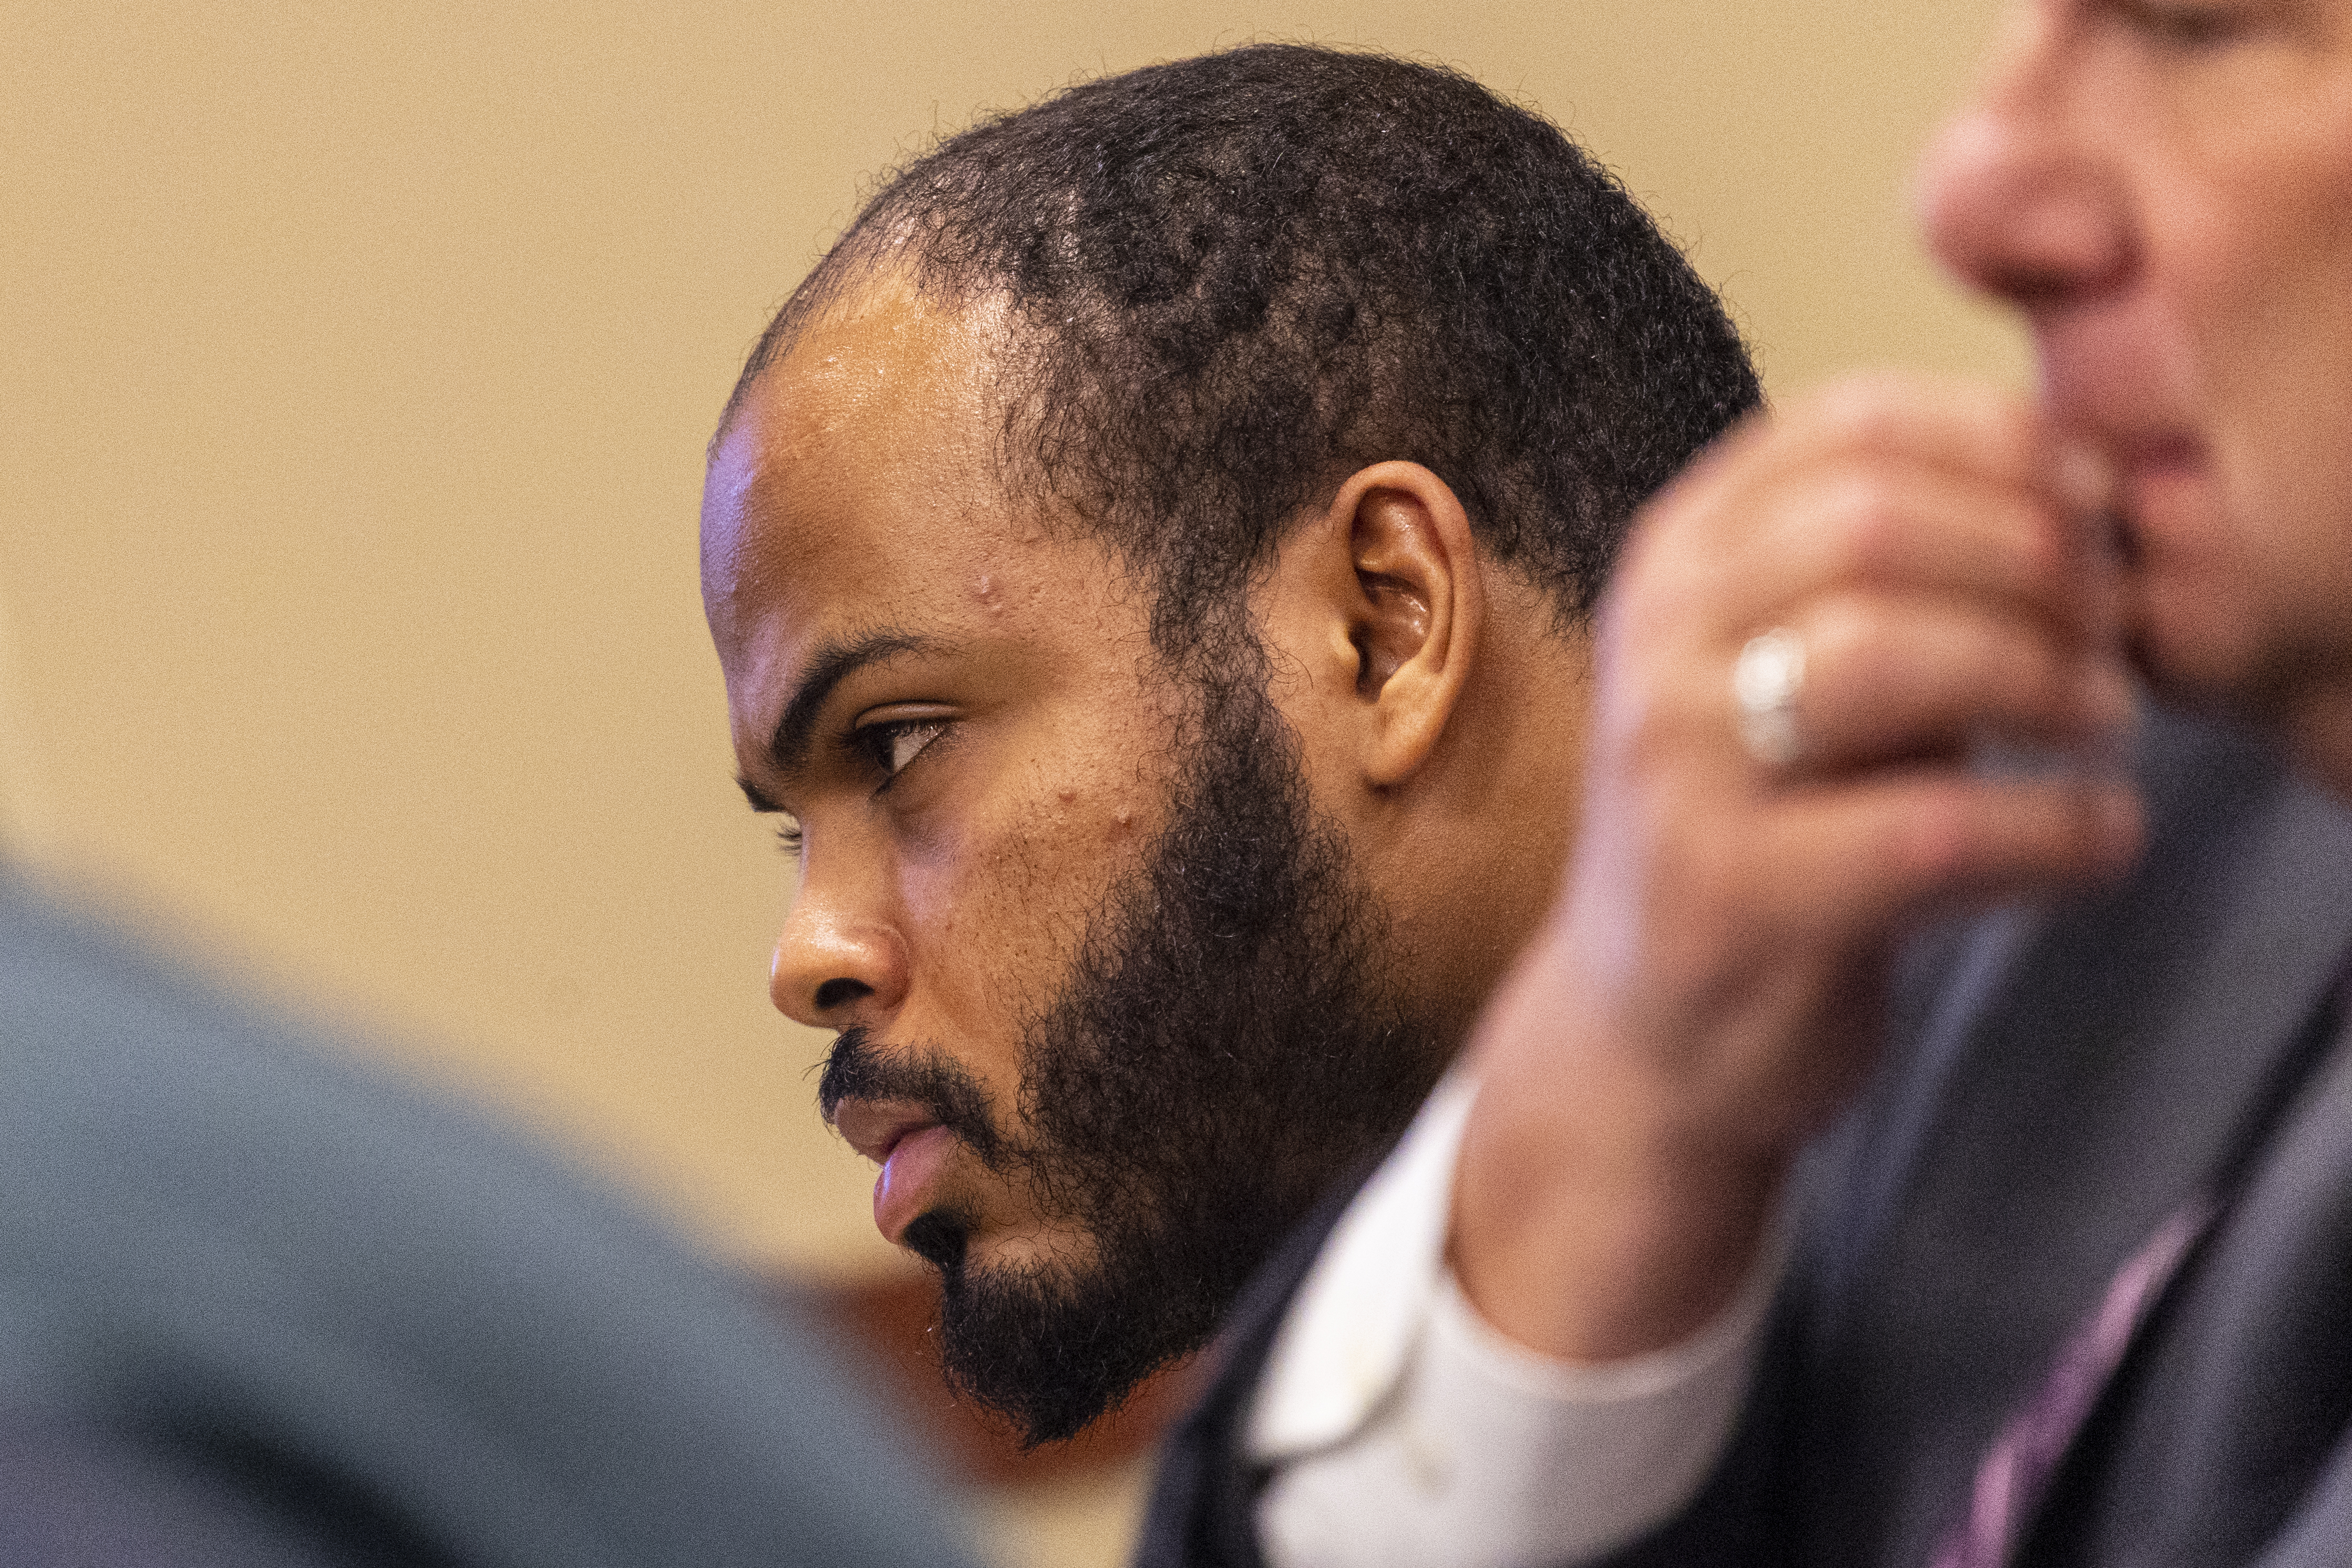 Javonte Rosa, 23,  appears for preliminary examination at the 63rd District Courthouse in Grand Rapids, Michigan on Thursday, June 30, 2022. The trio of defendants appeared in court, (not pictured Rishy Manning, 22, and Jaheim Hayes—Goree, 20) are charged with felony murder in the shooting death of Joseph Wilder, 50, who was shot and killed during a robbery attempt at a Huntington Bank ATM on South Division Avenue in May of 2022. (Joel Bissell | MLive.com)